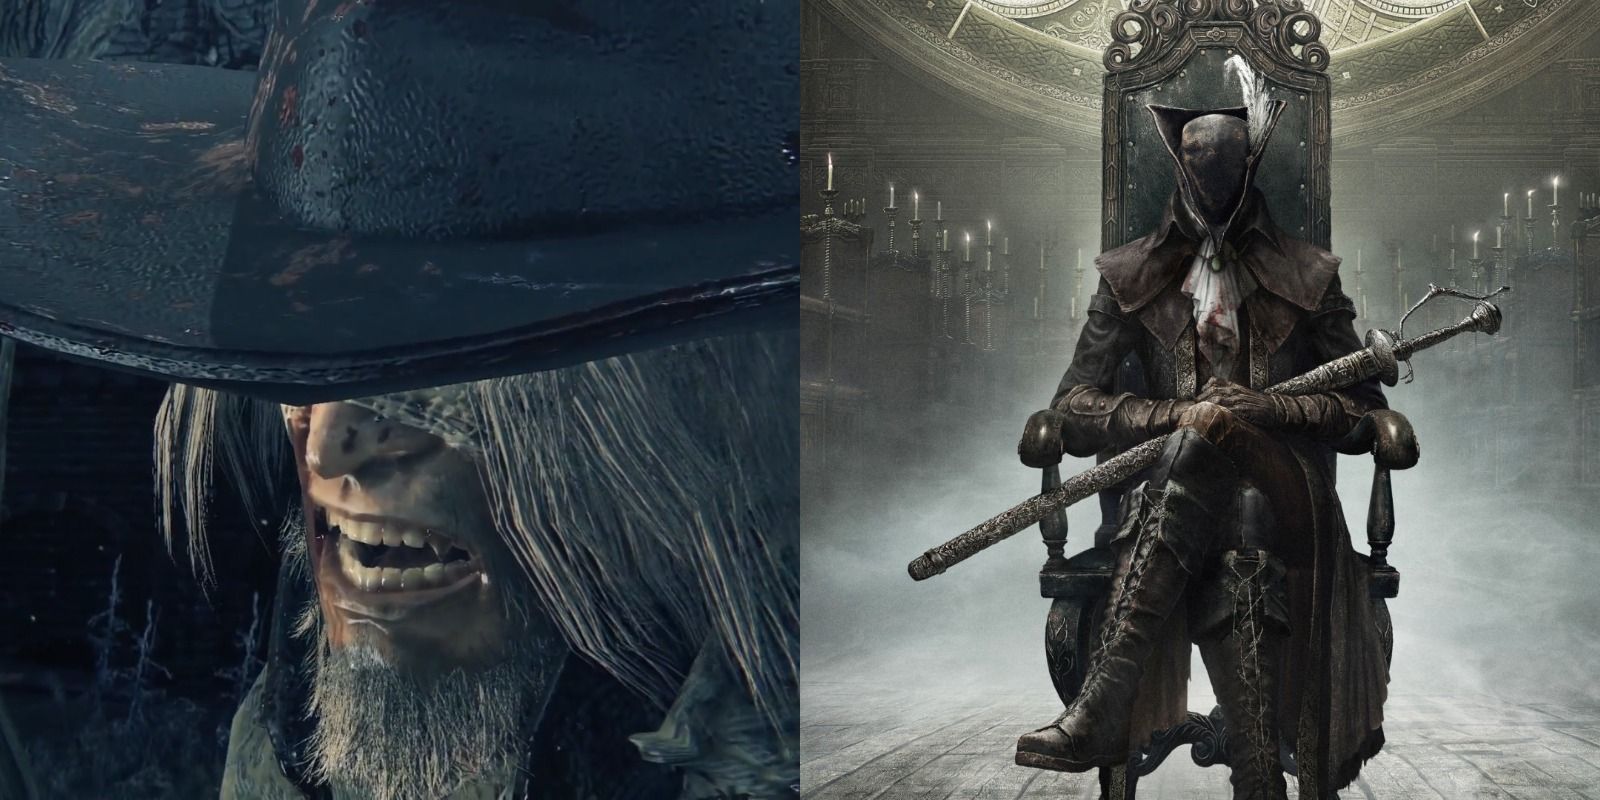 Gameplay still of Father Gascoigne and a Hunter from Bloodborne